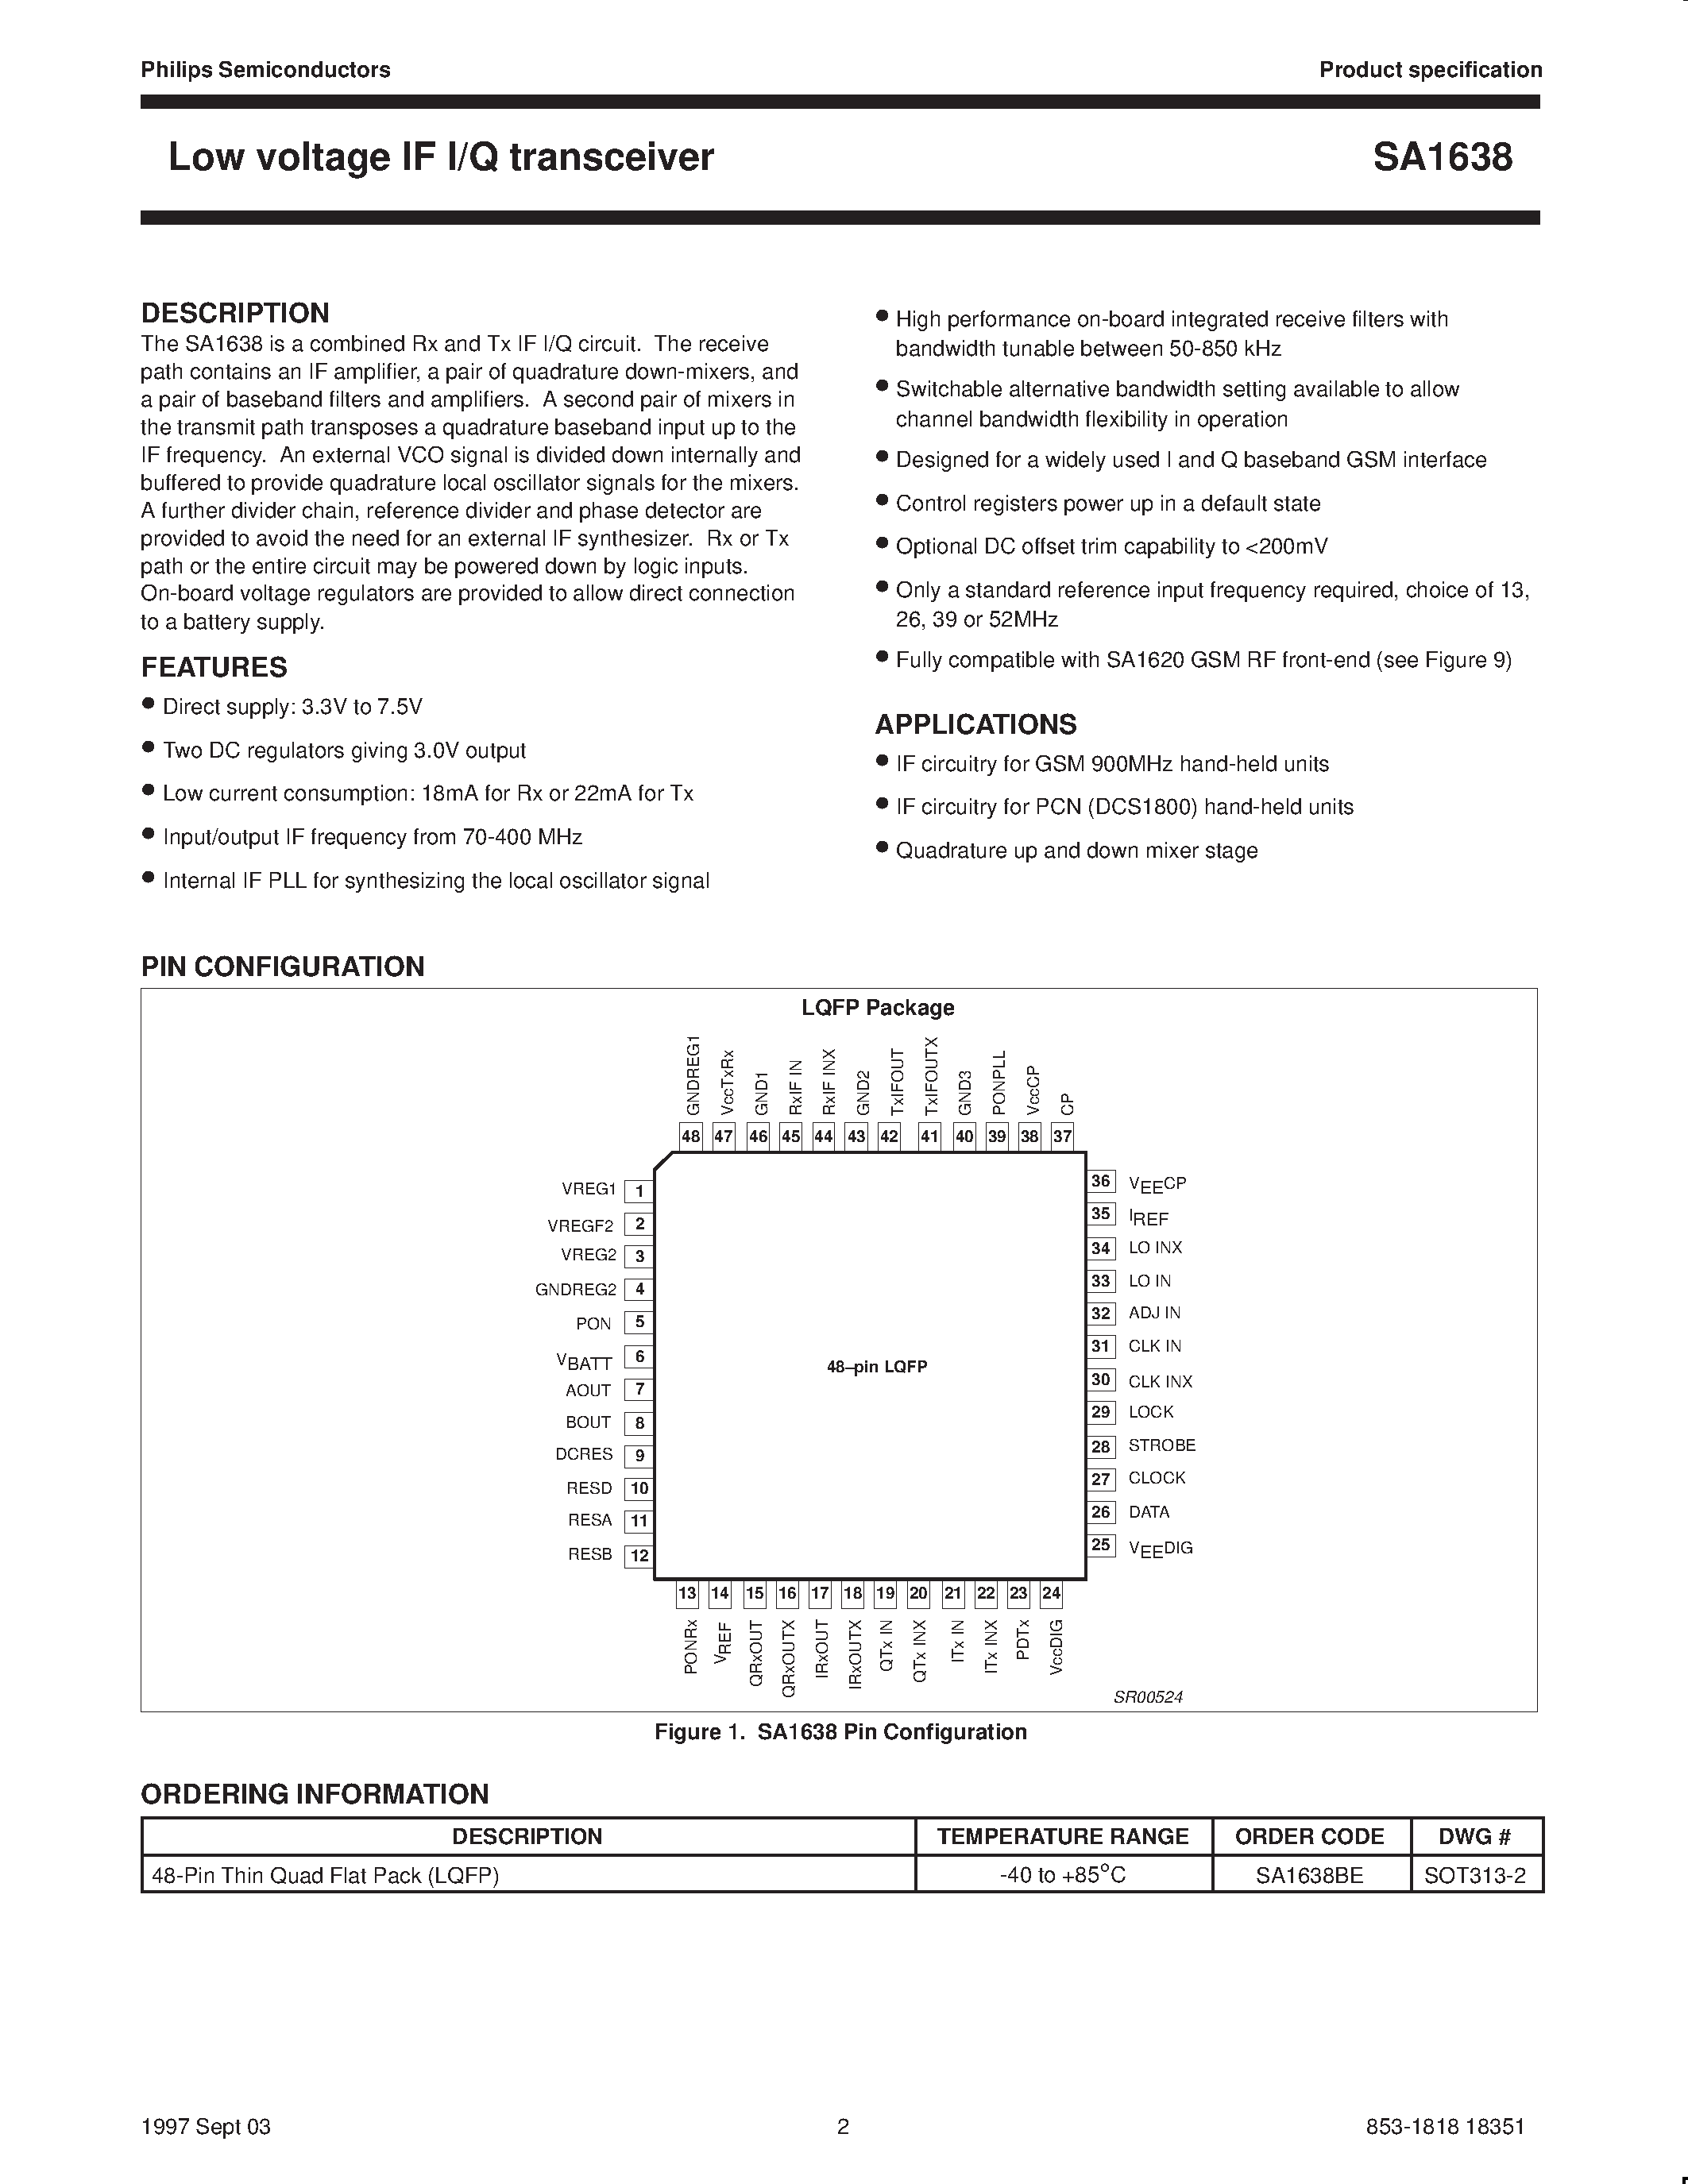 Datasheet SA1638BE - Low voltage IF I/Q transceiver page 2